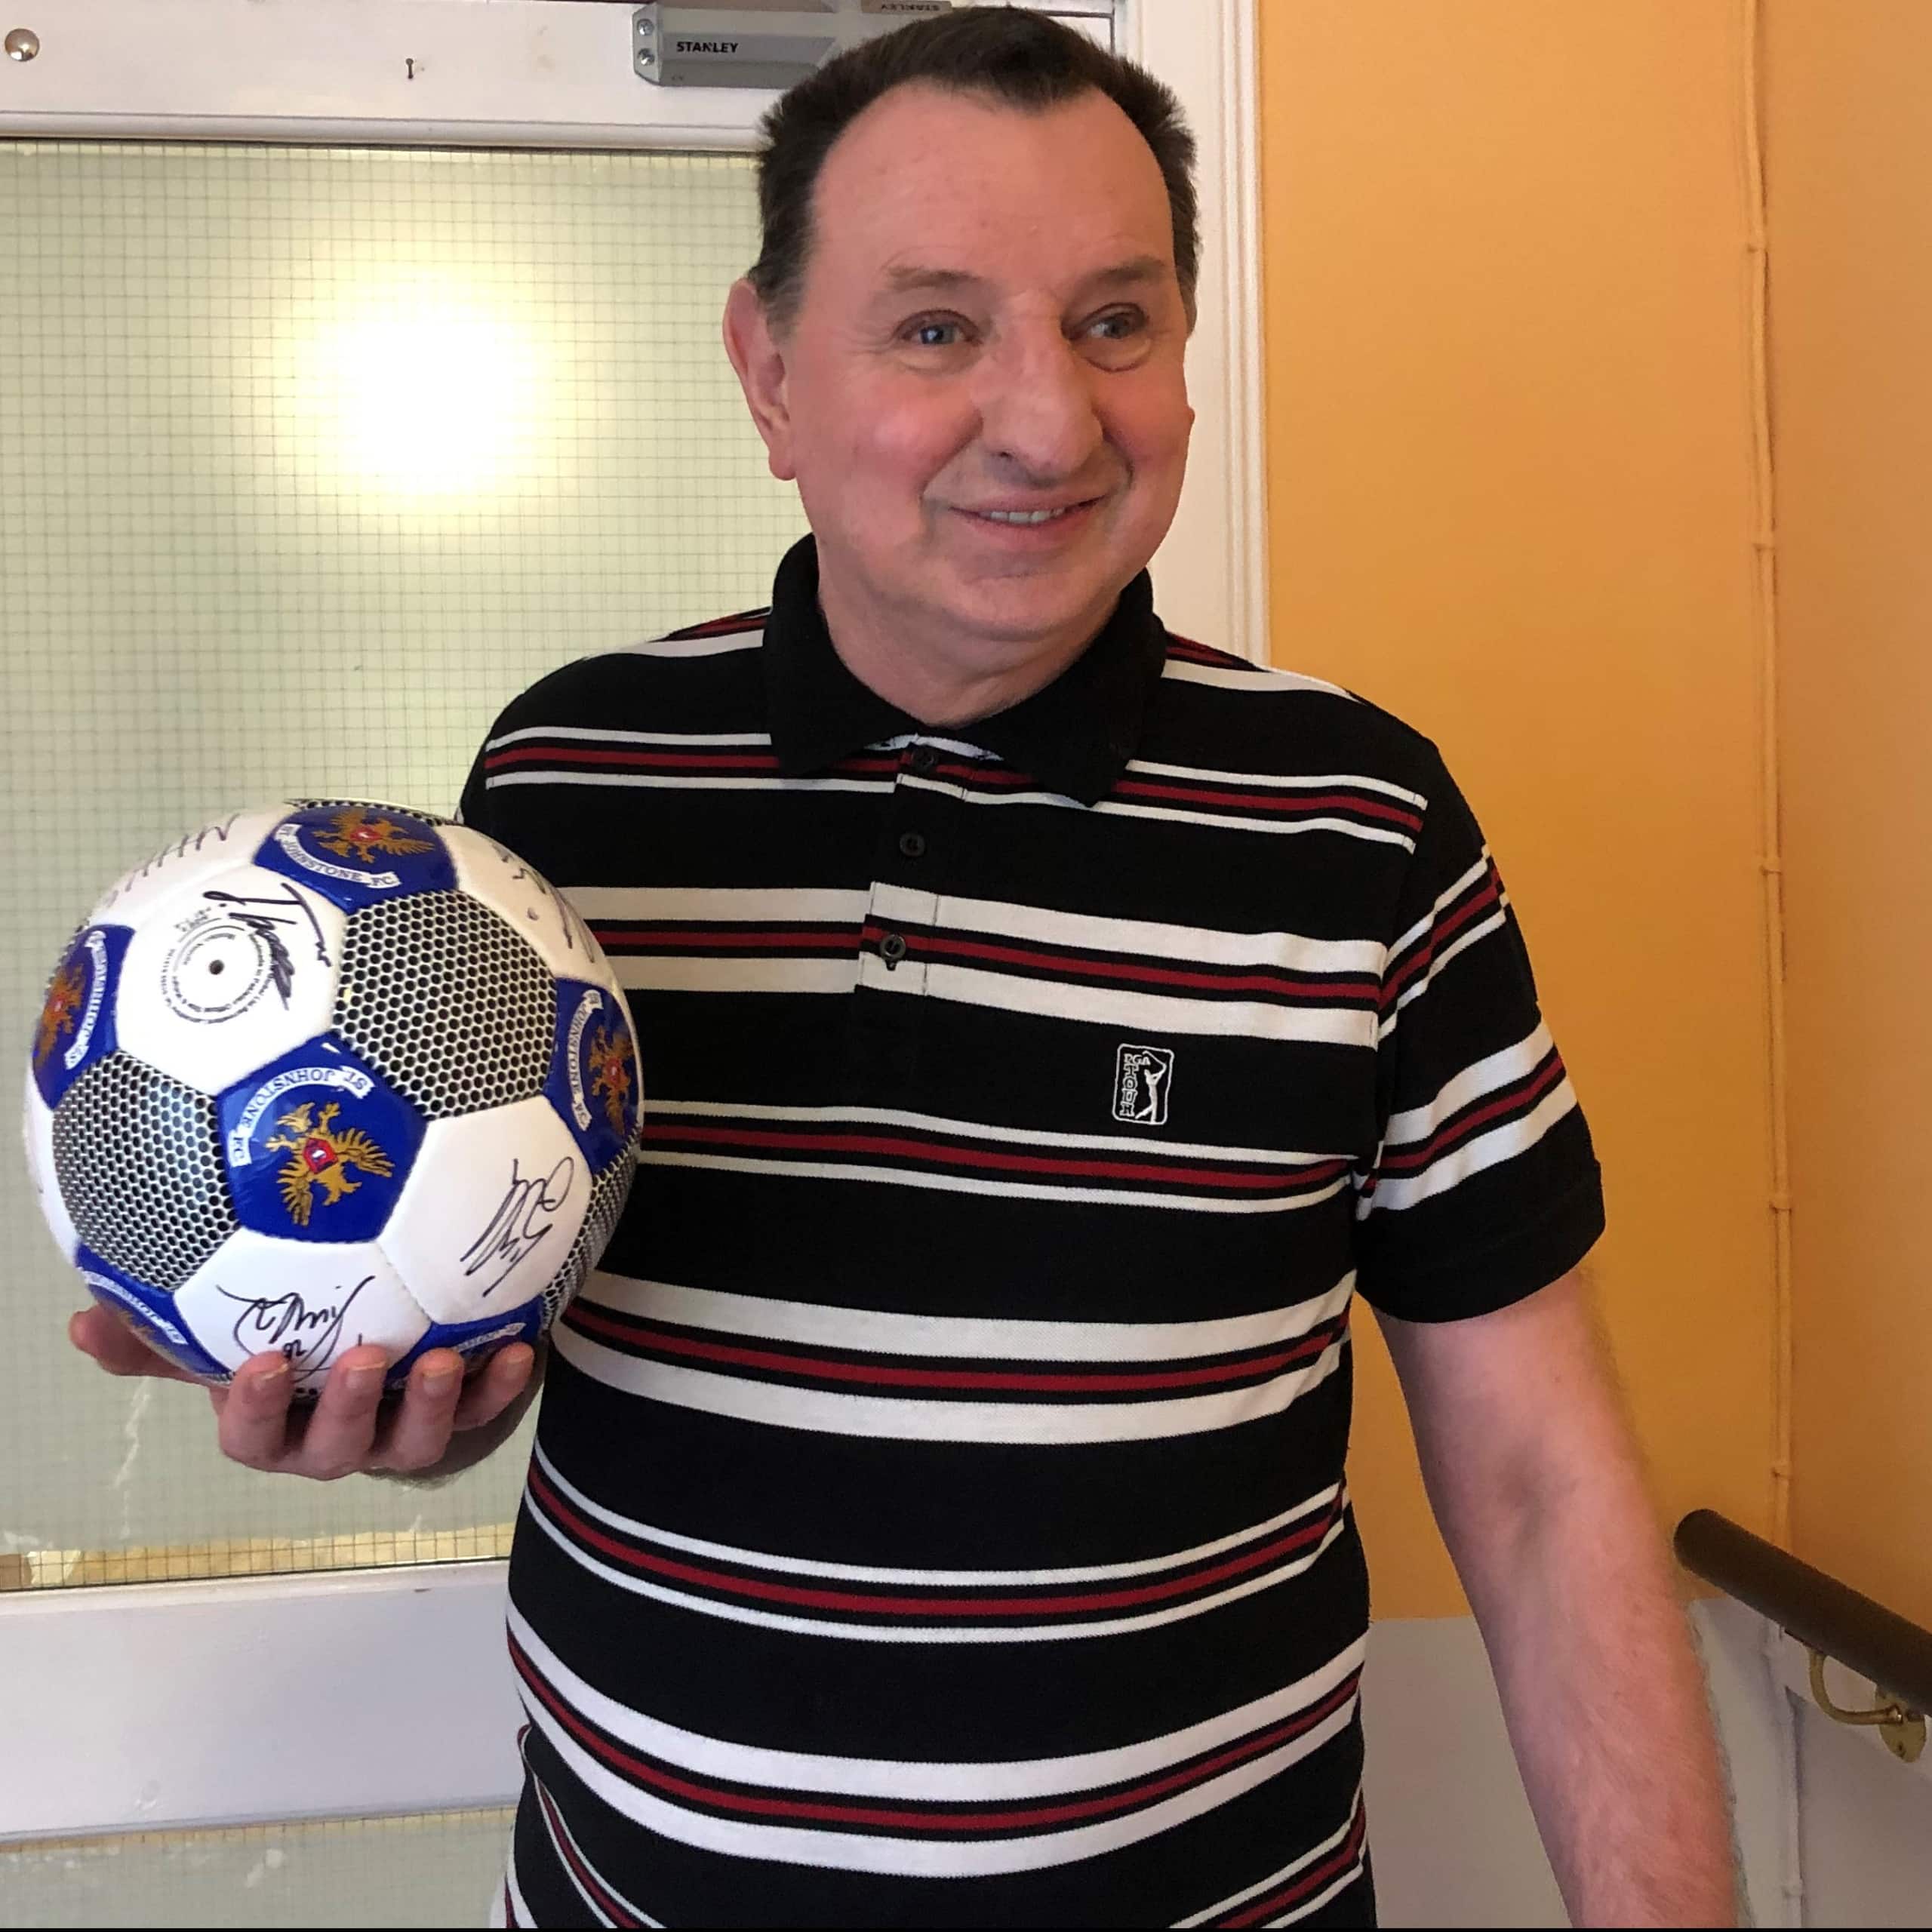 A resident at Blairgowrie Care Home Muirton House shows off his gift from St Johnstone Football Club.